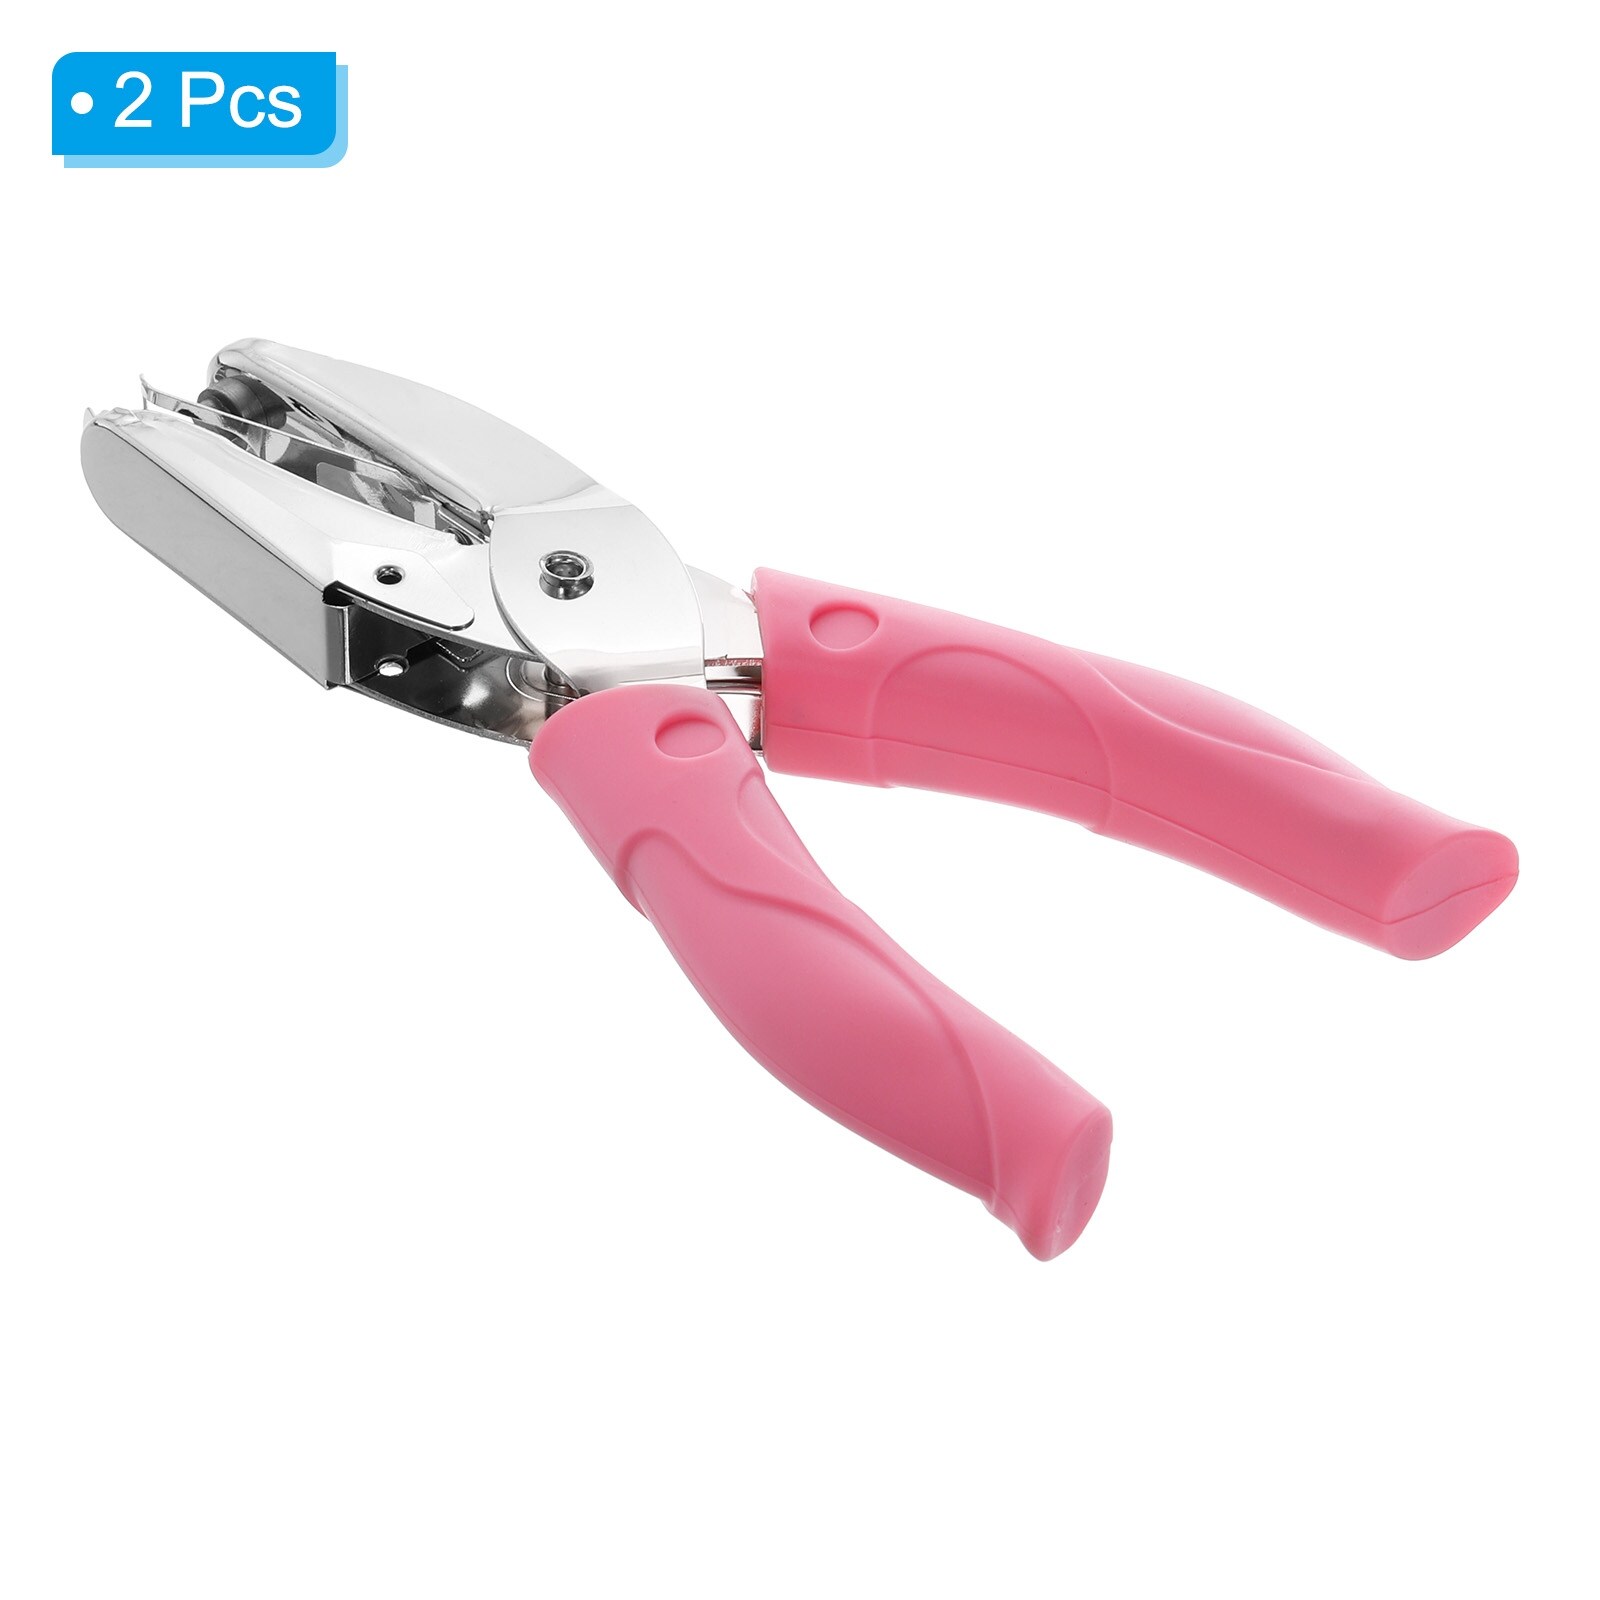 0.2 Single Hole Punch Handheld Hole Puncher with Soft Grip Square